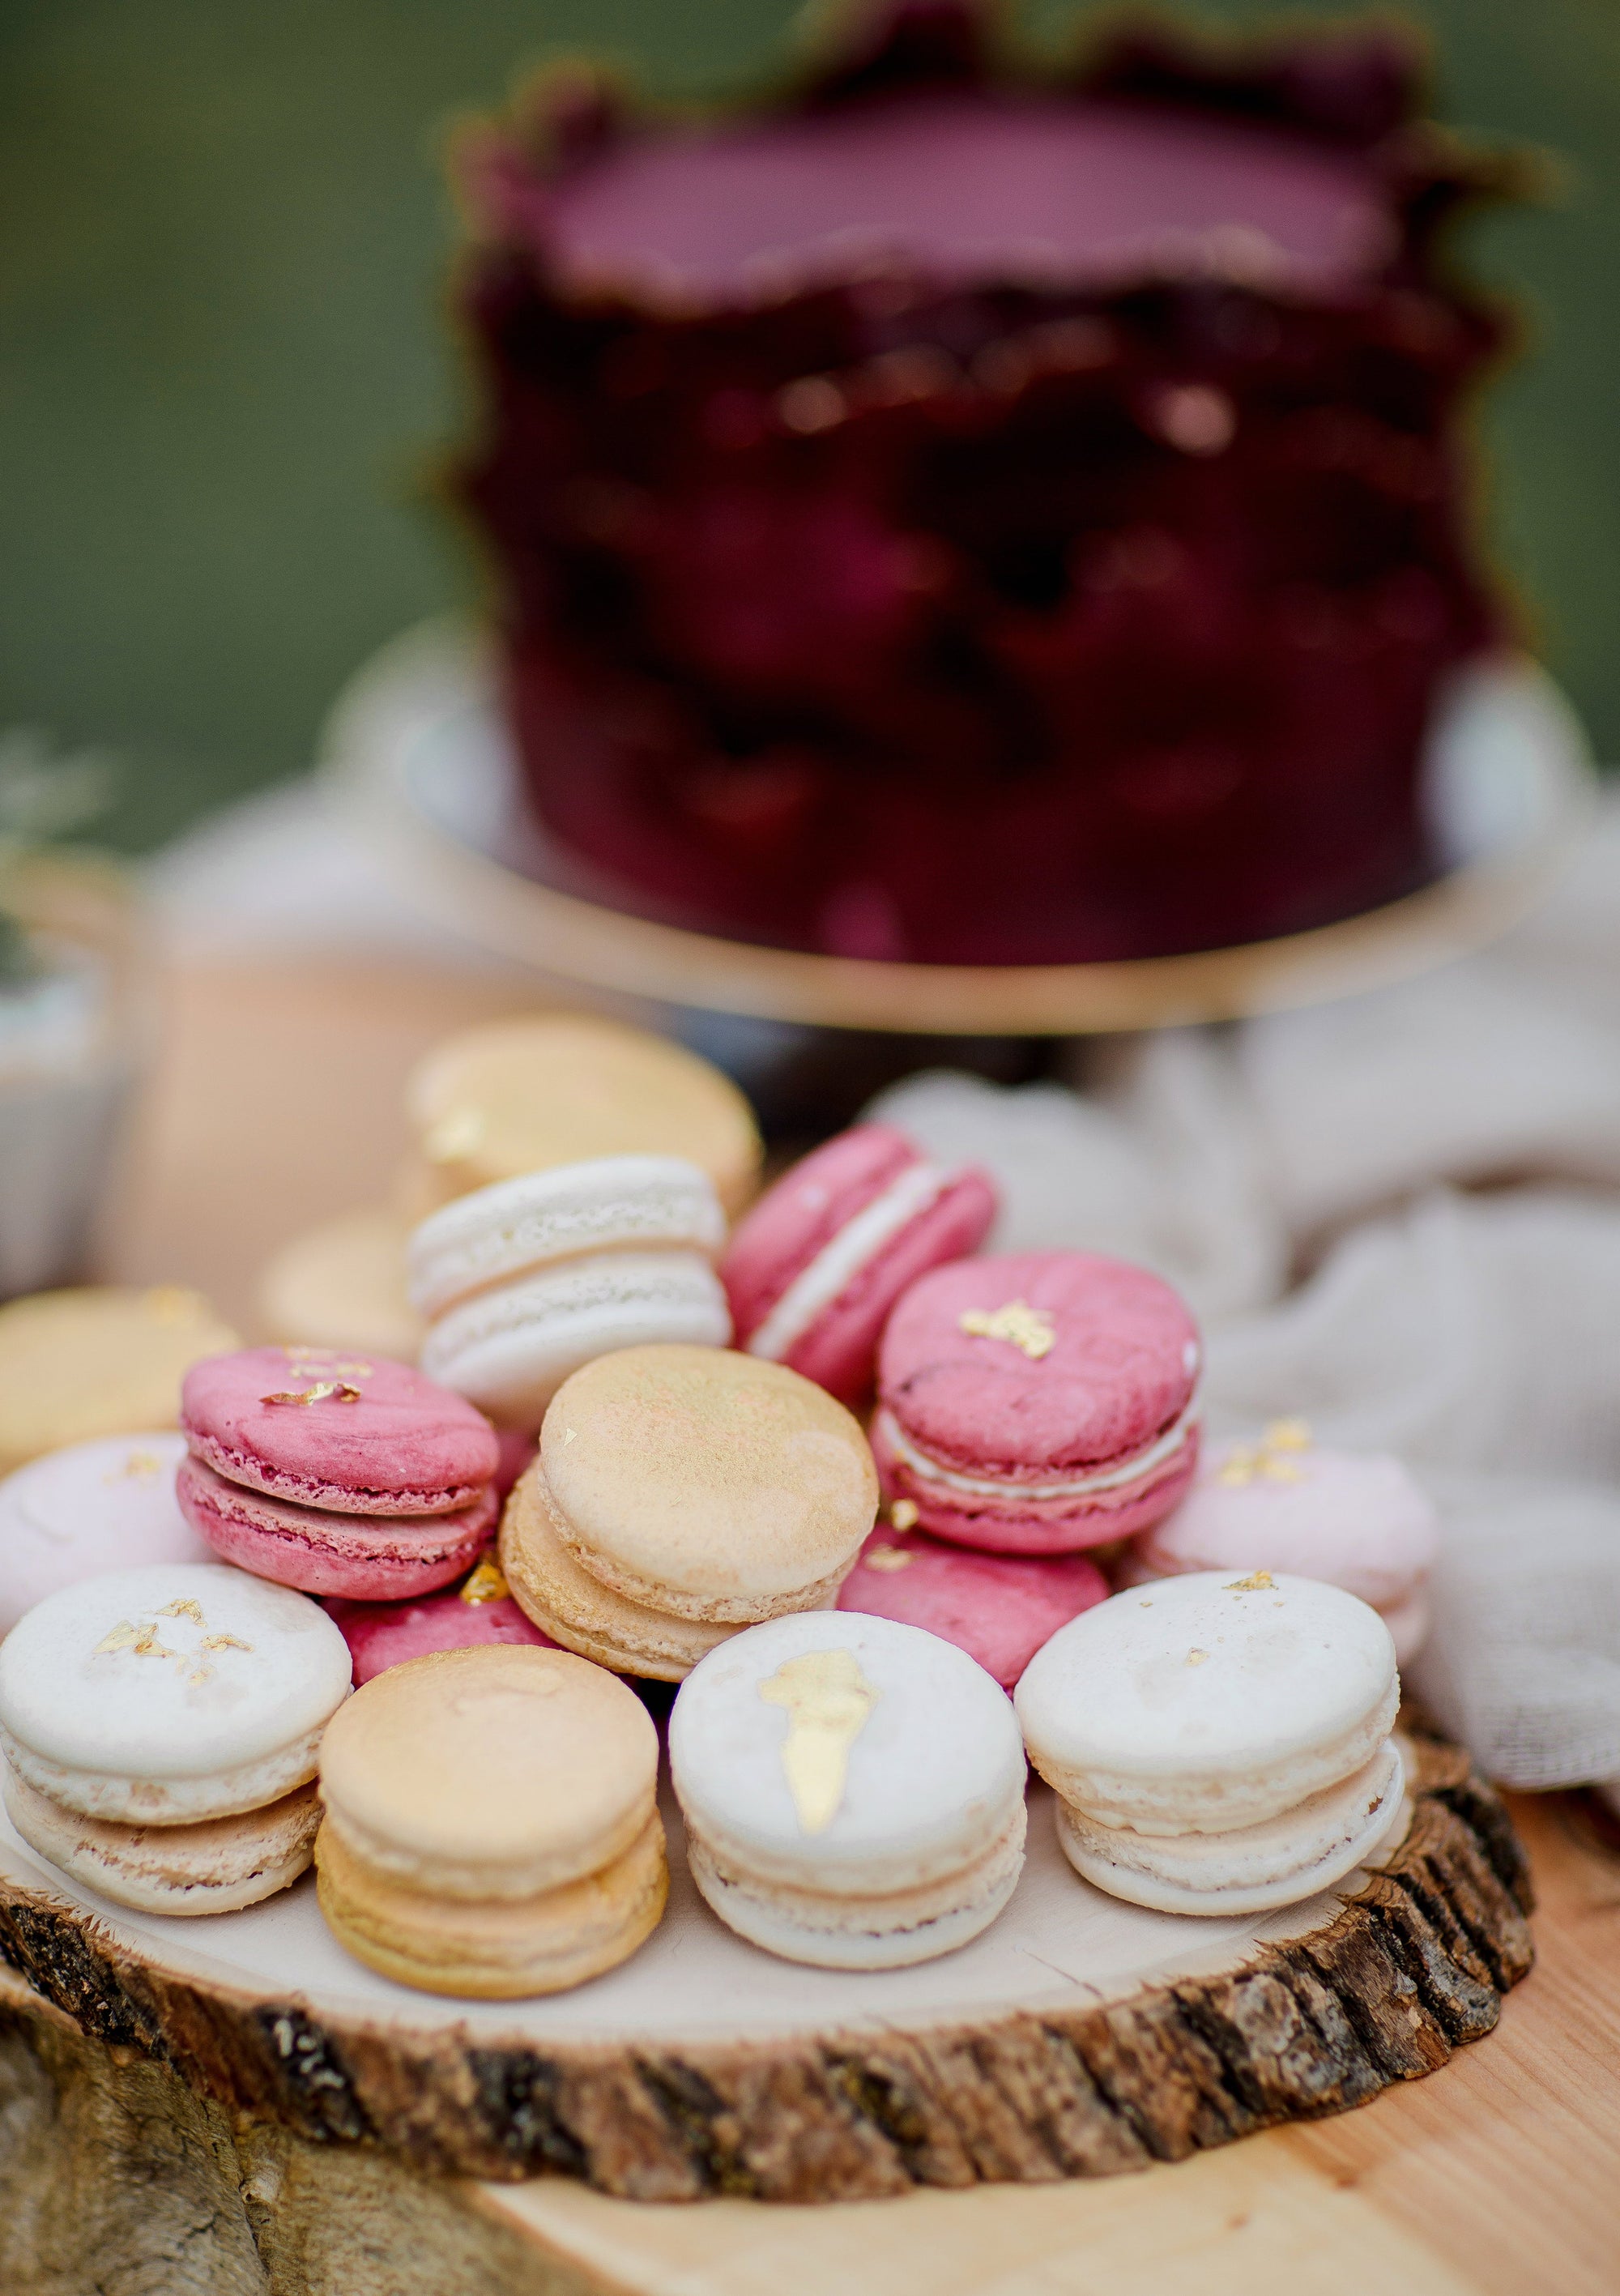 Best French Macarons in Greenville SC | Baked Cookie Shop